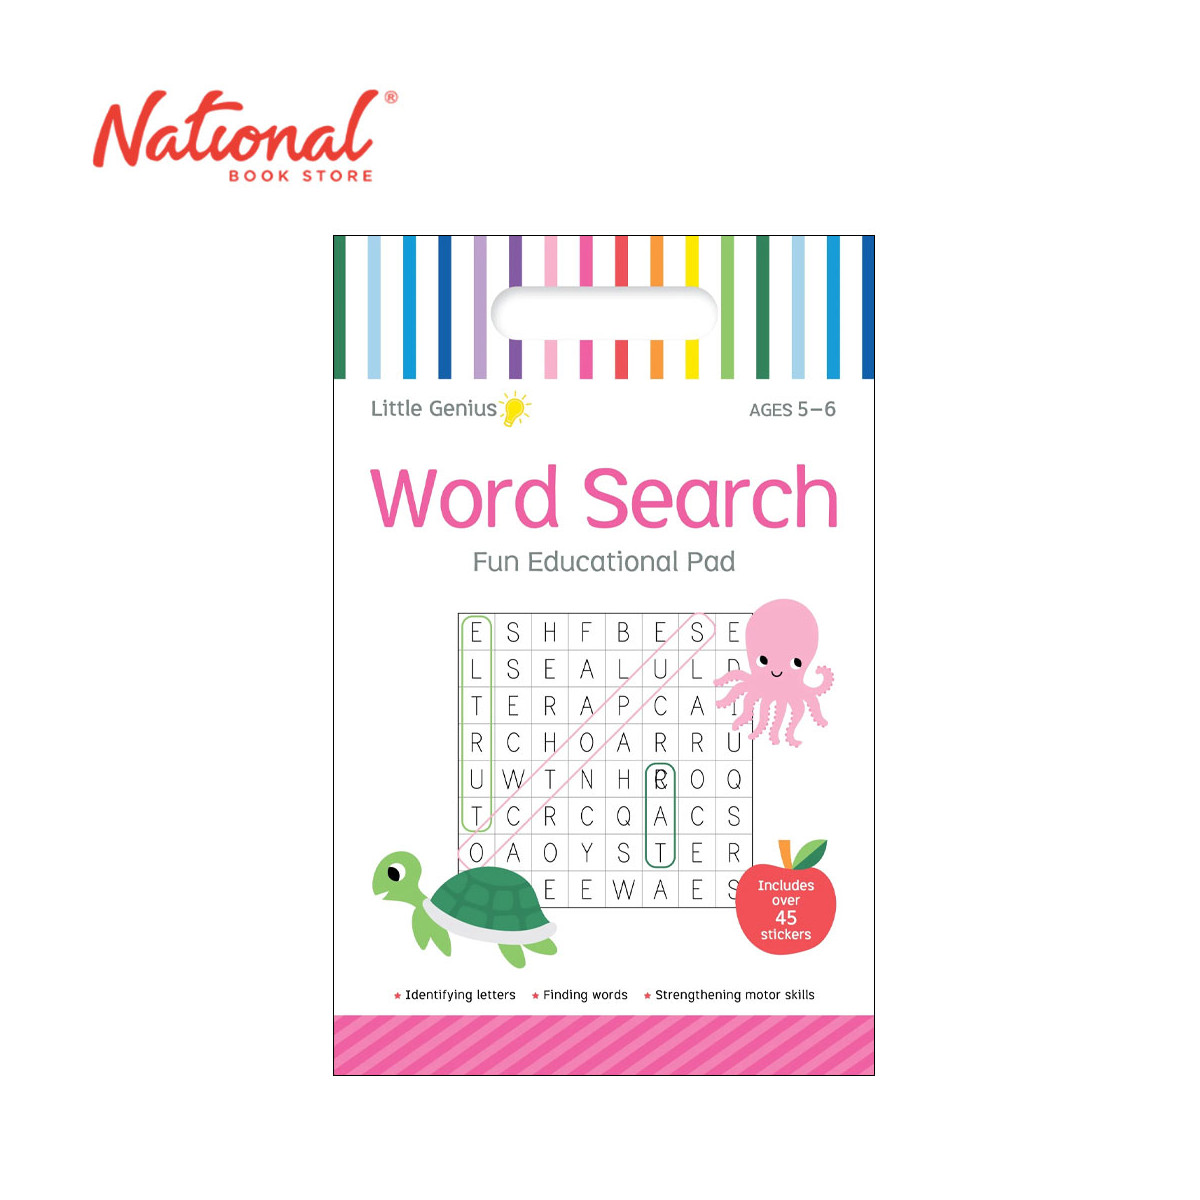 Little Genius Volume 2: Word Search Fun Educational Pad - Trade Paperback - Activity Books for Kids